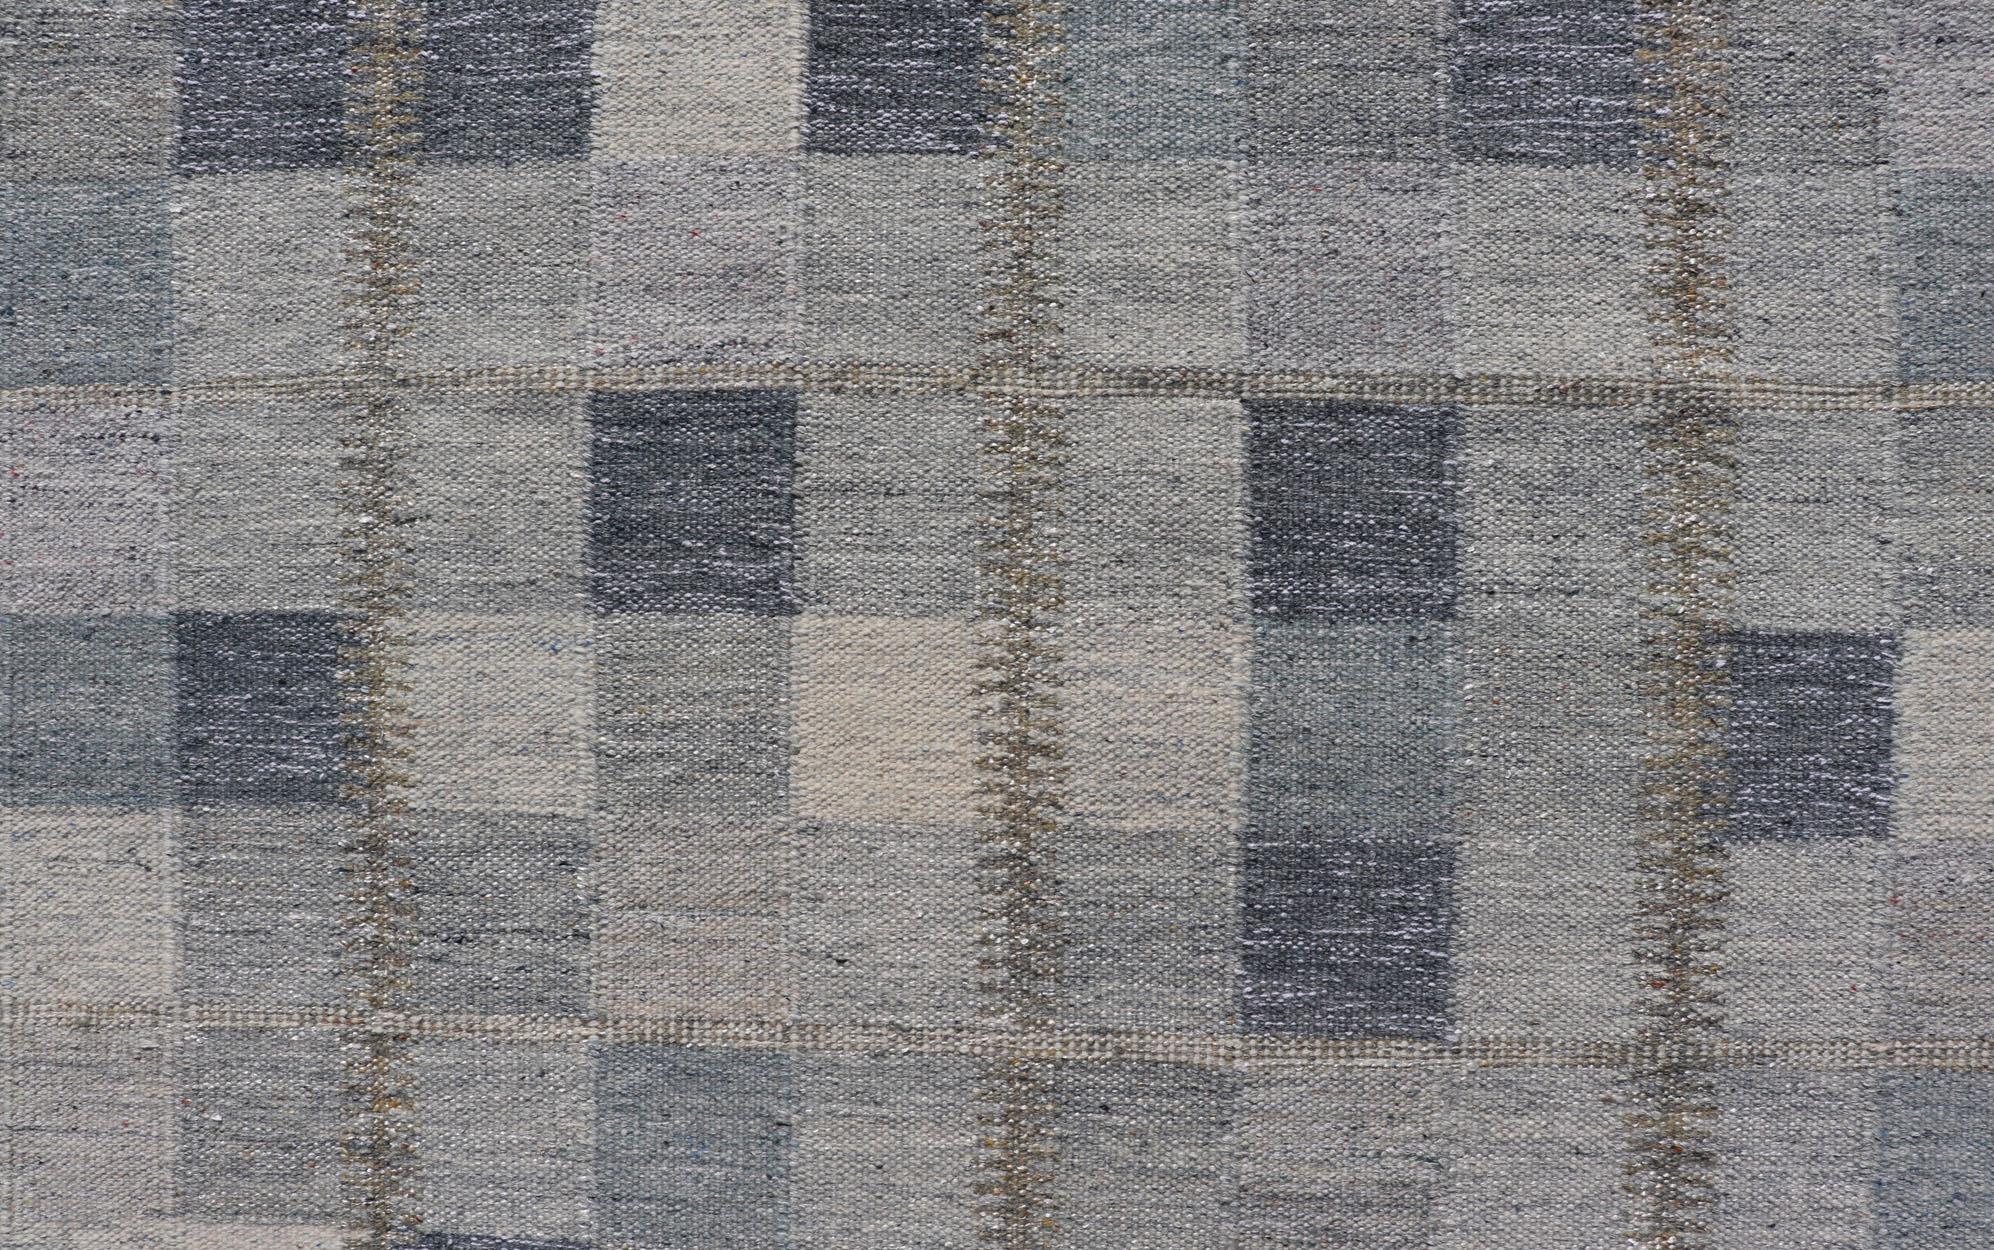 Contemporary Scandinavian Style Flat-Weave Design Rug with Checkerboard Design in Gray, Blues For Sale